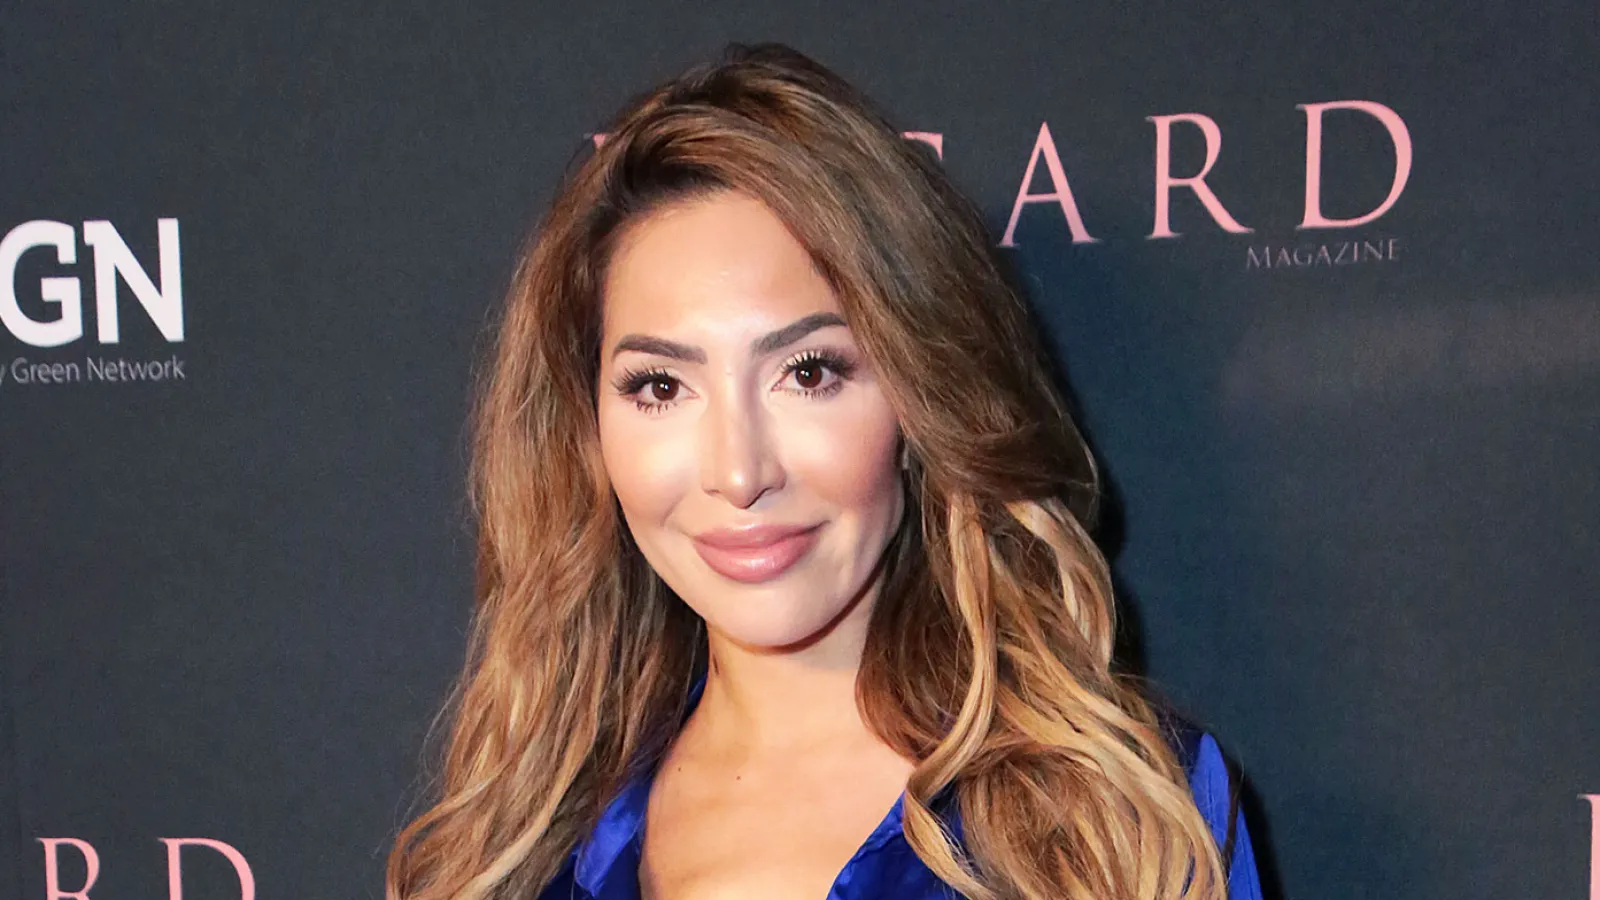 Farrah Abraham, a former "Teen Mom OG" star who is accused of slapping a security guard, has been charged with battery.